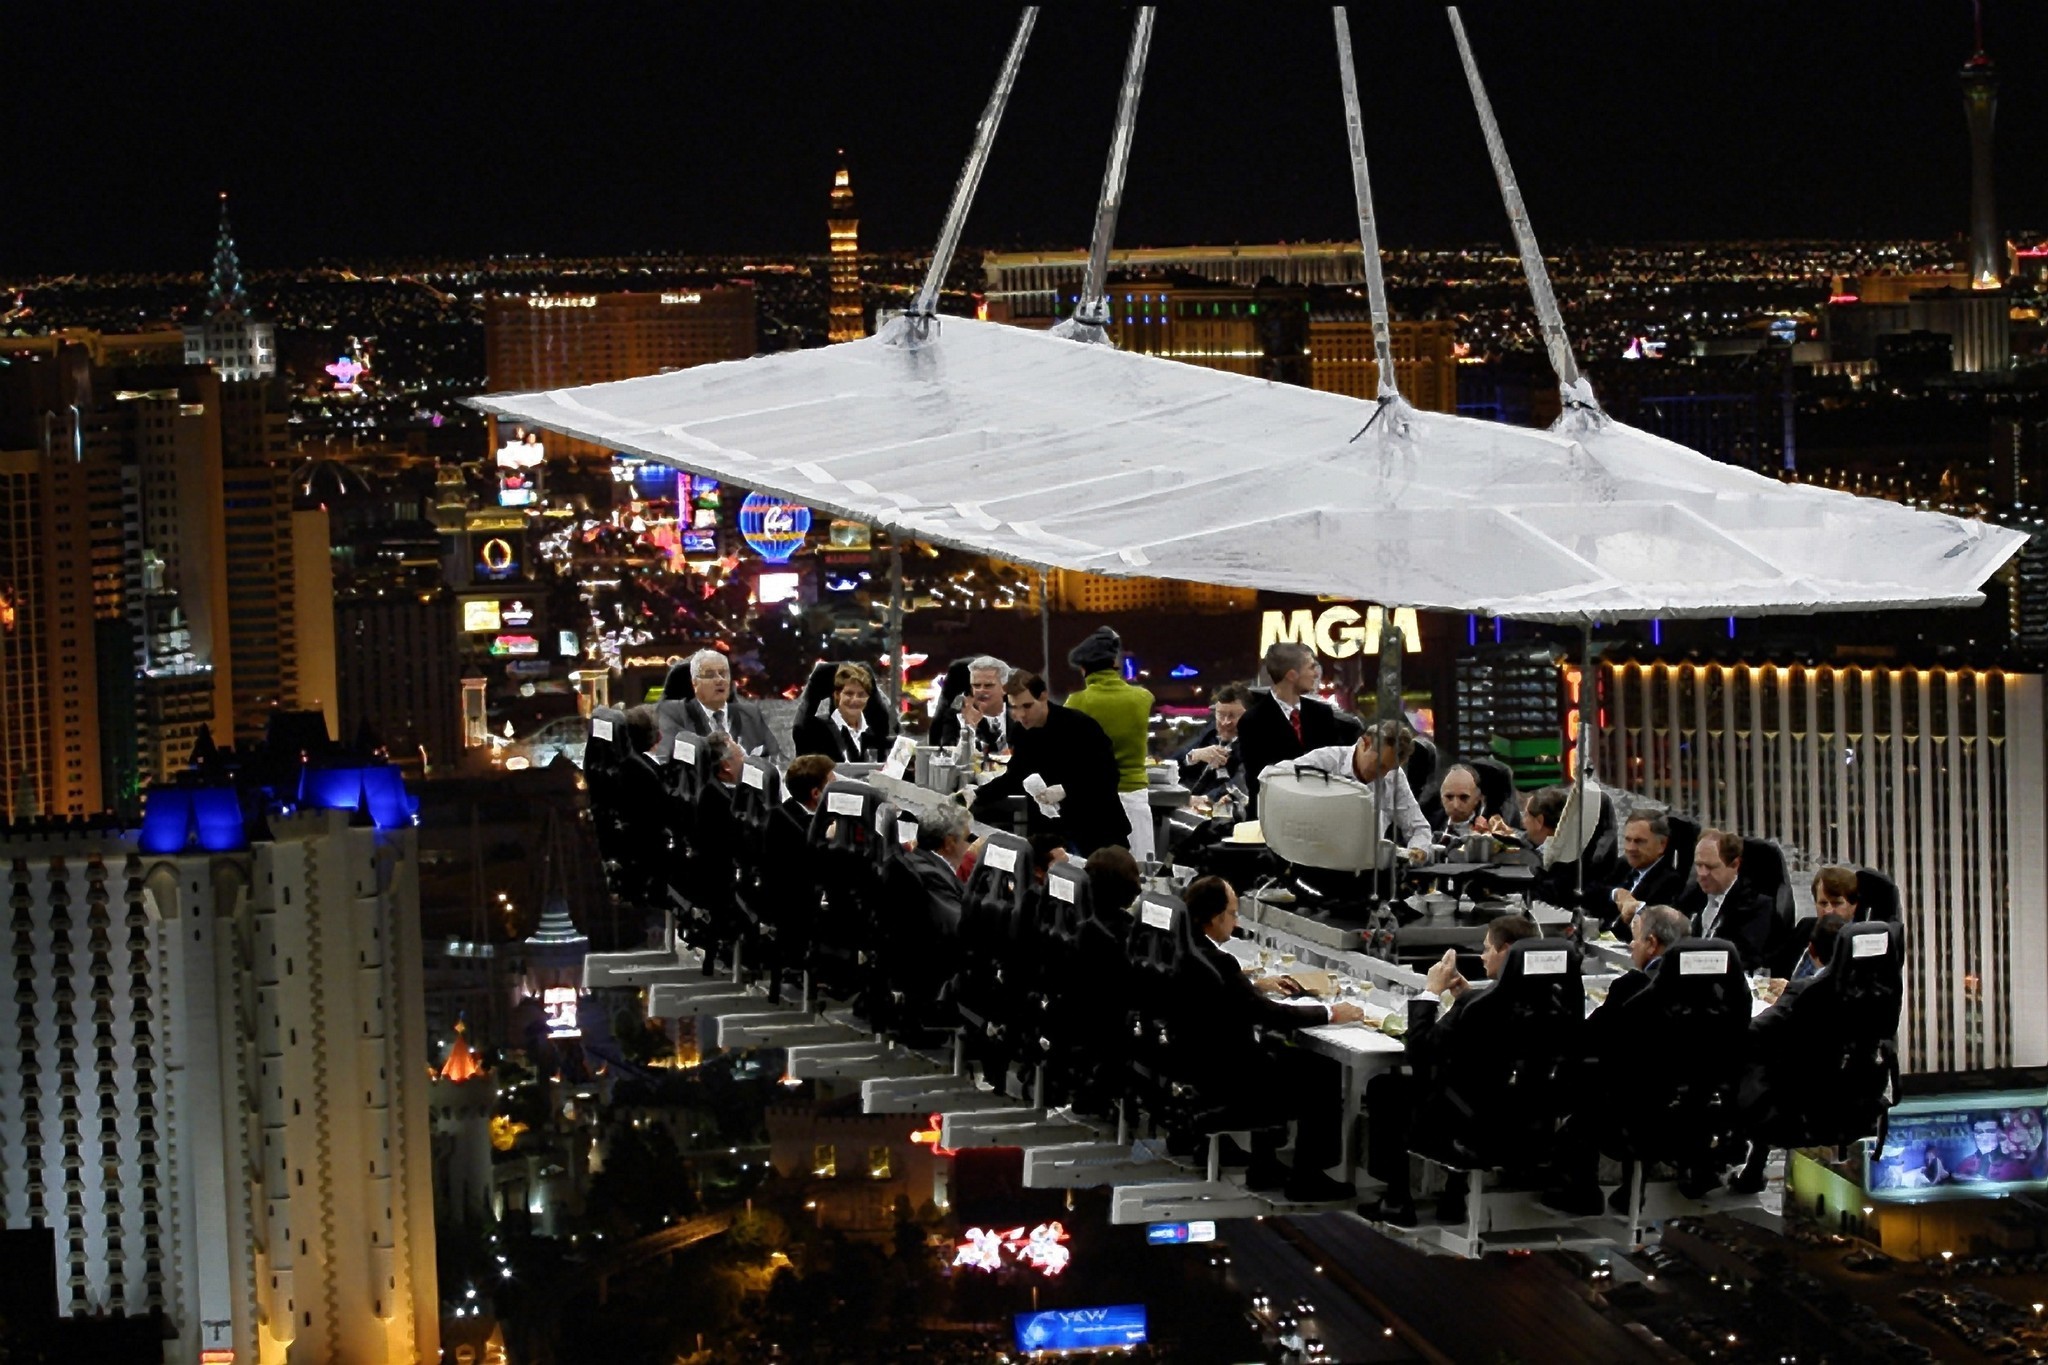 Dinner in the Sky restaurant to suspend Las Vegas diners 180 feet in ...